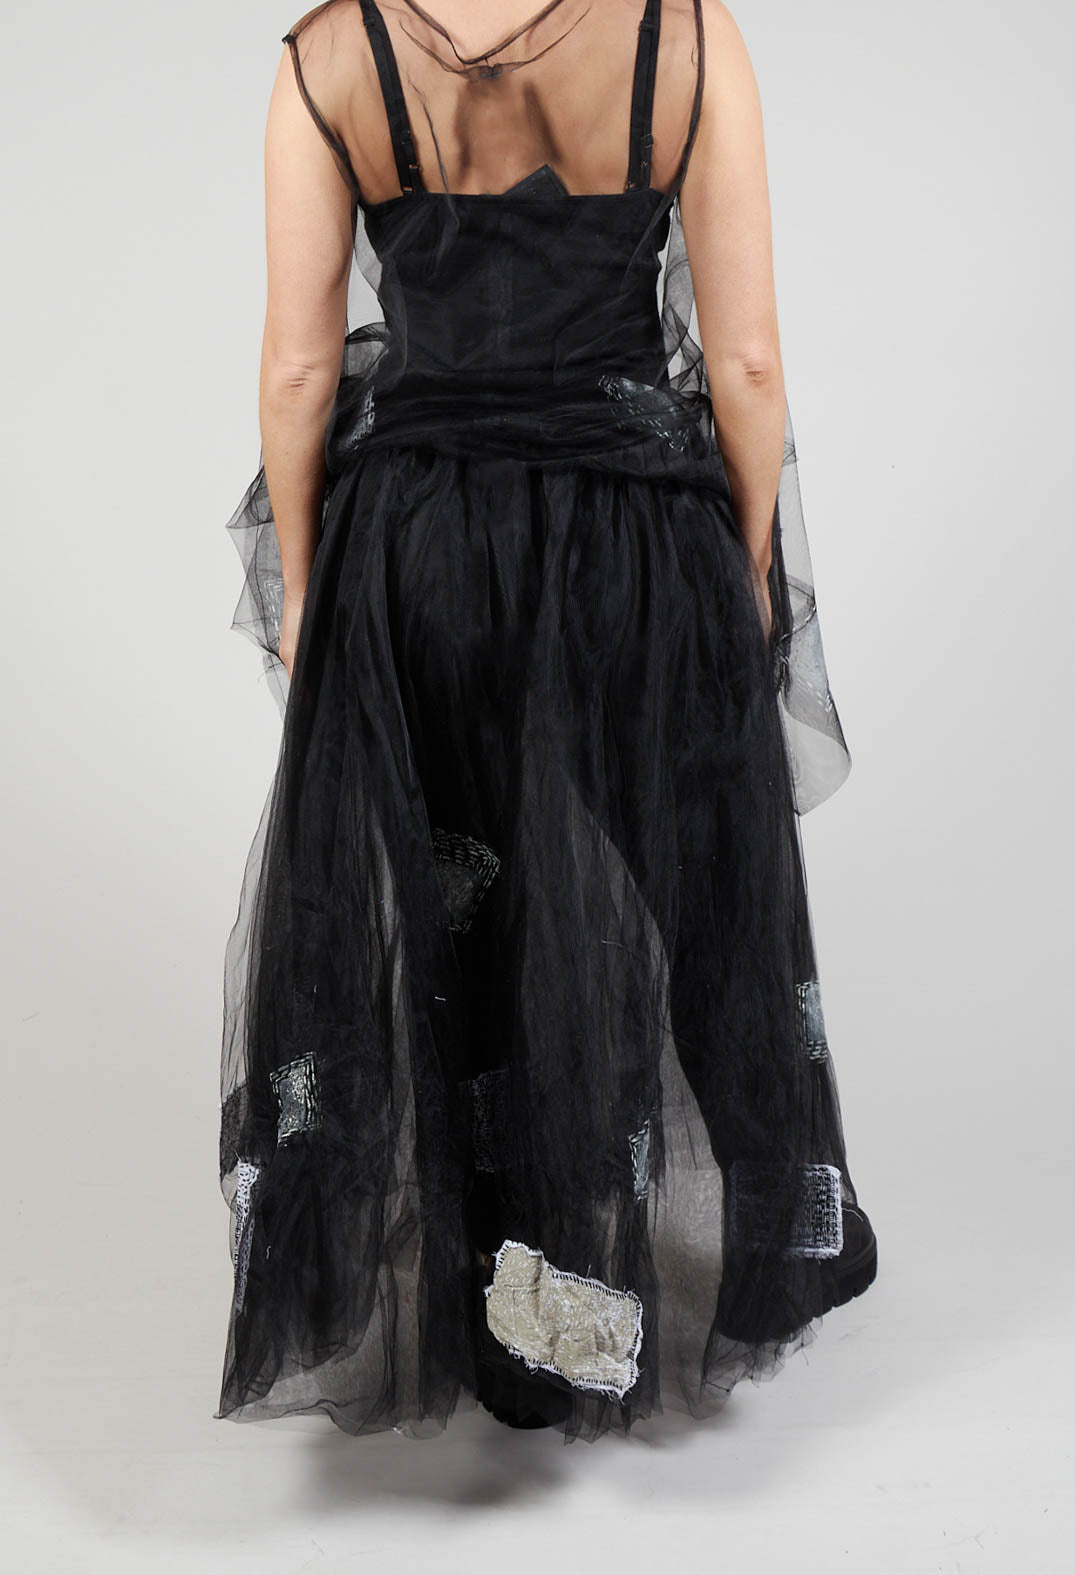 Patch Print Tulle Skirt in Black